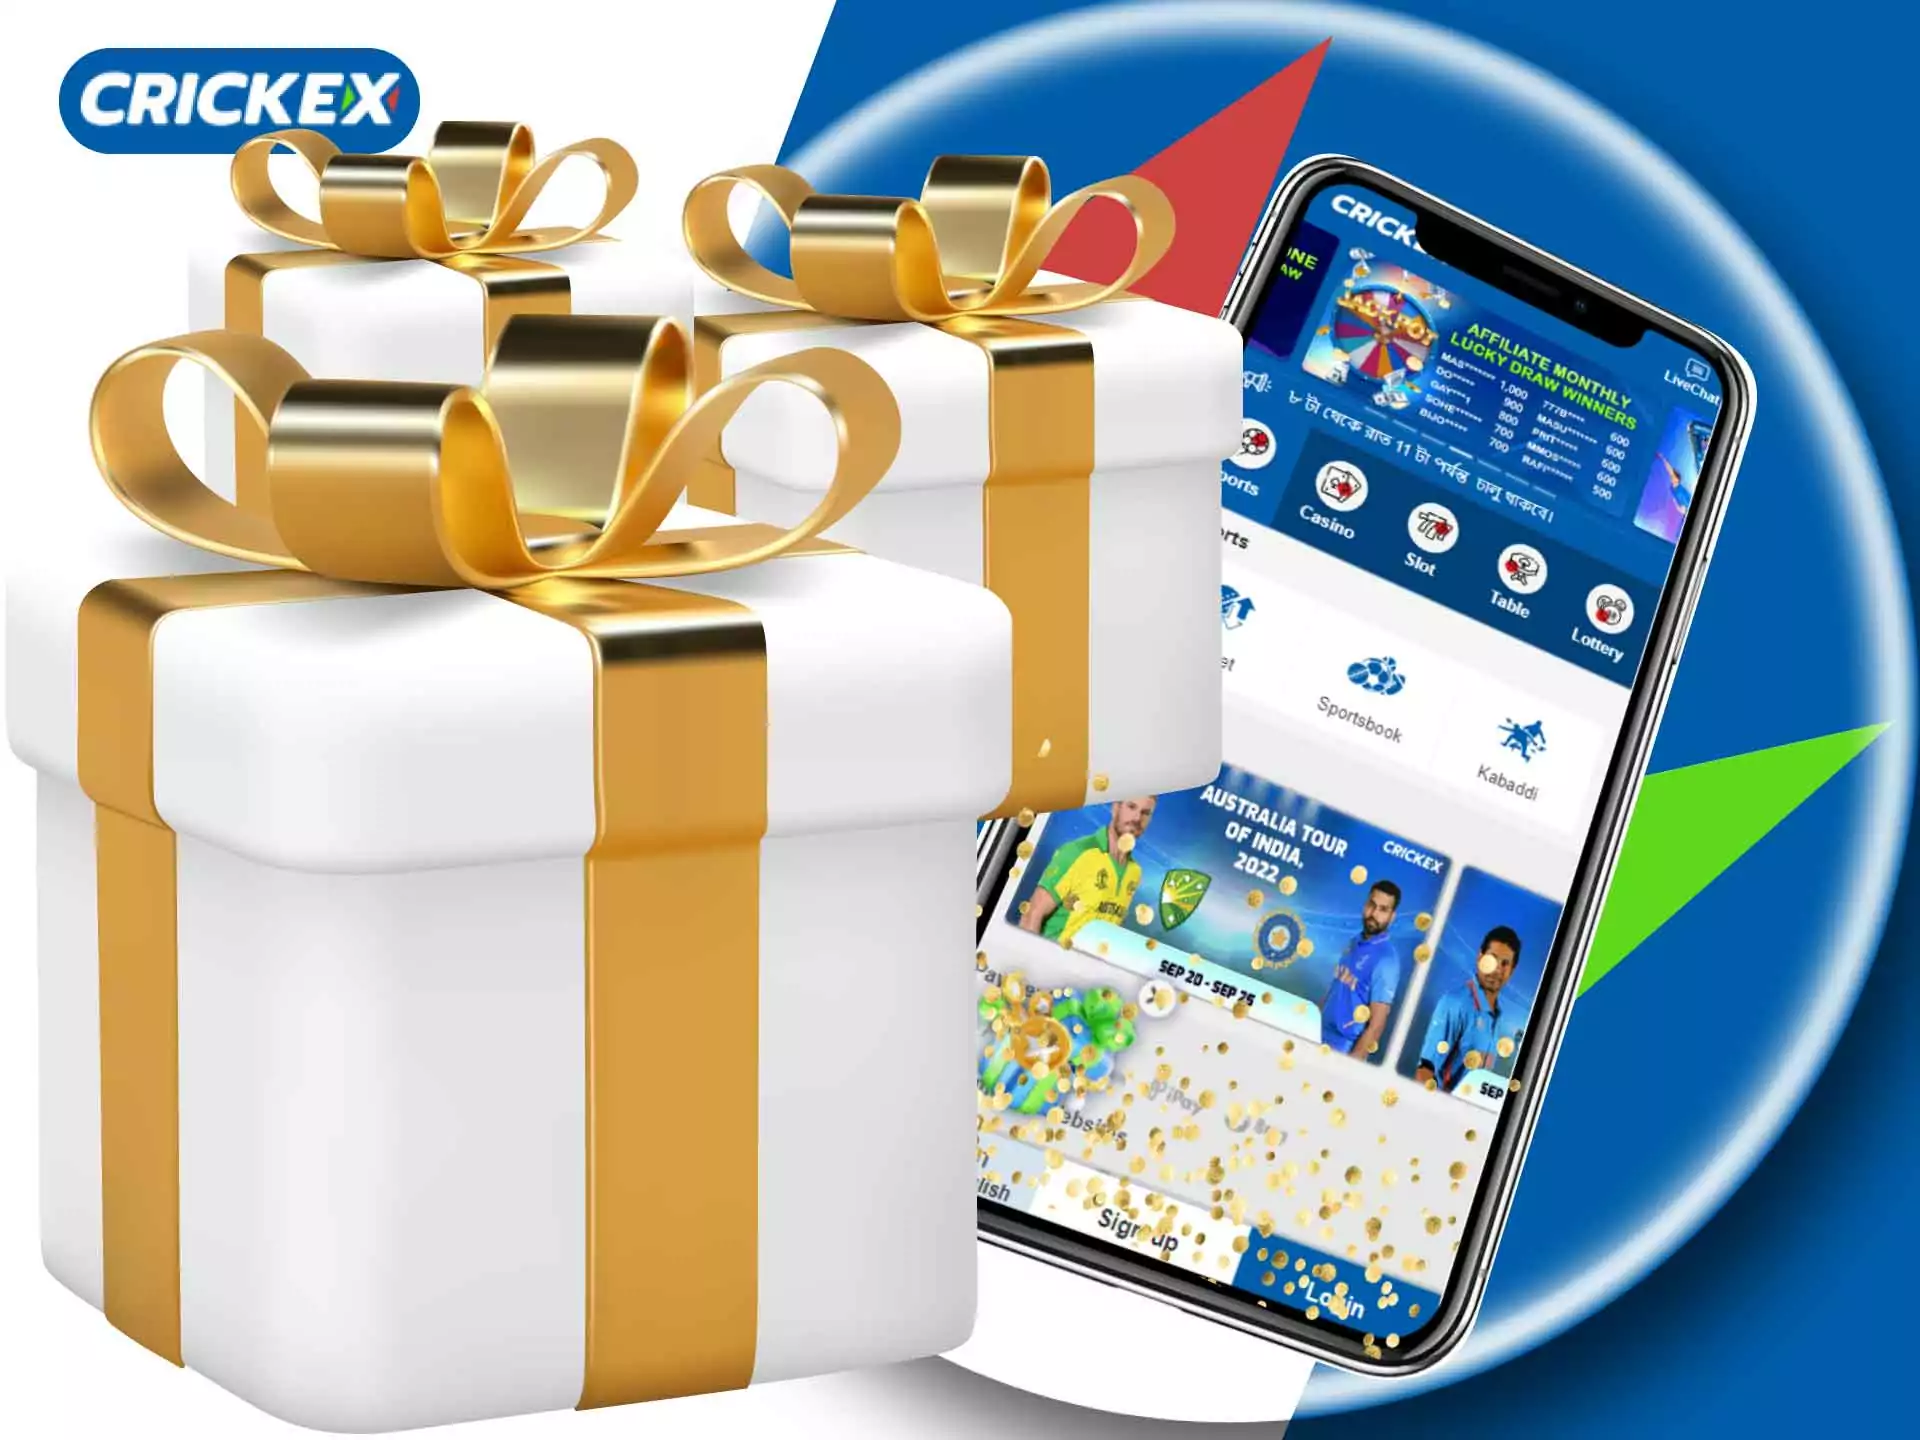 The Crickex app offers a lot of bonuses for both new and regular bettors.